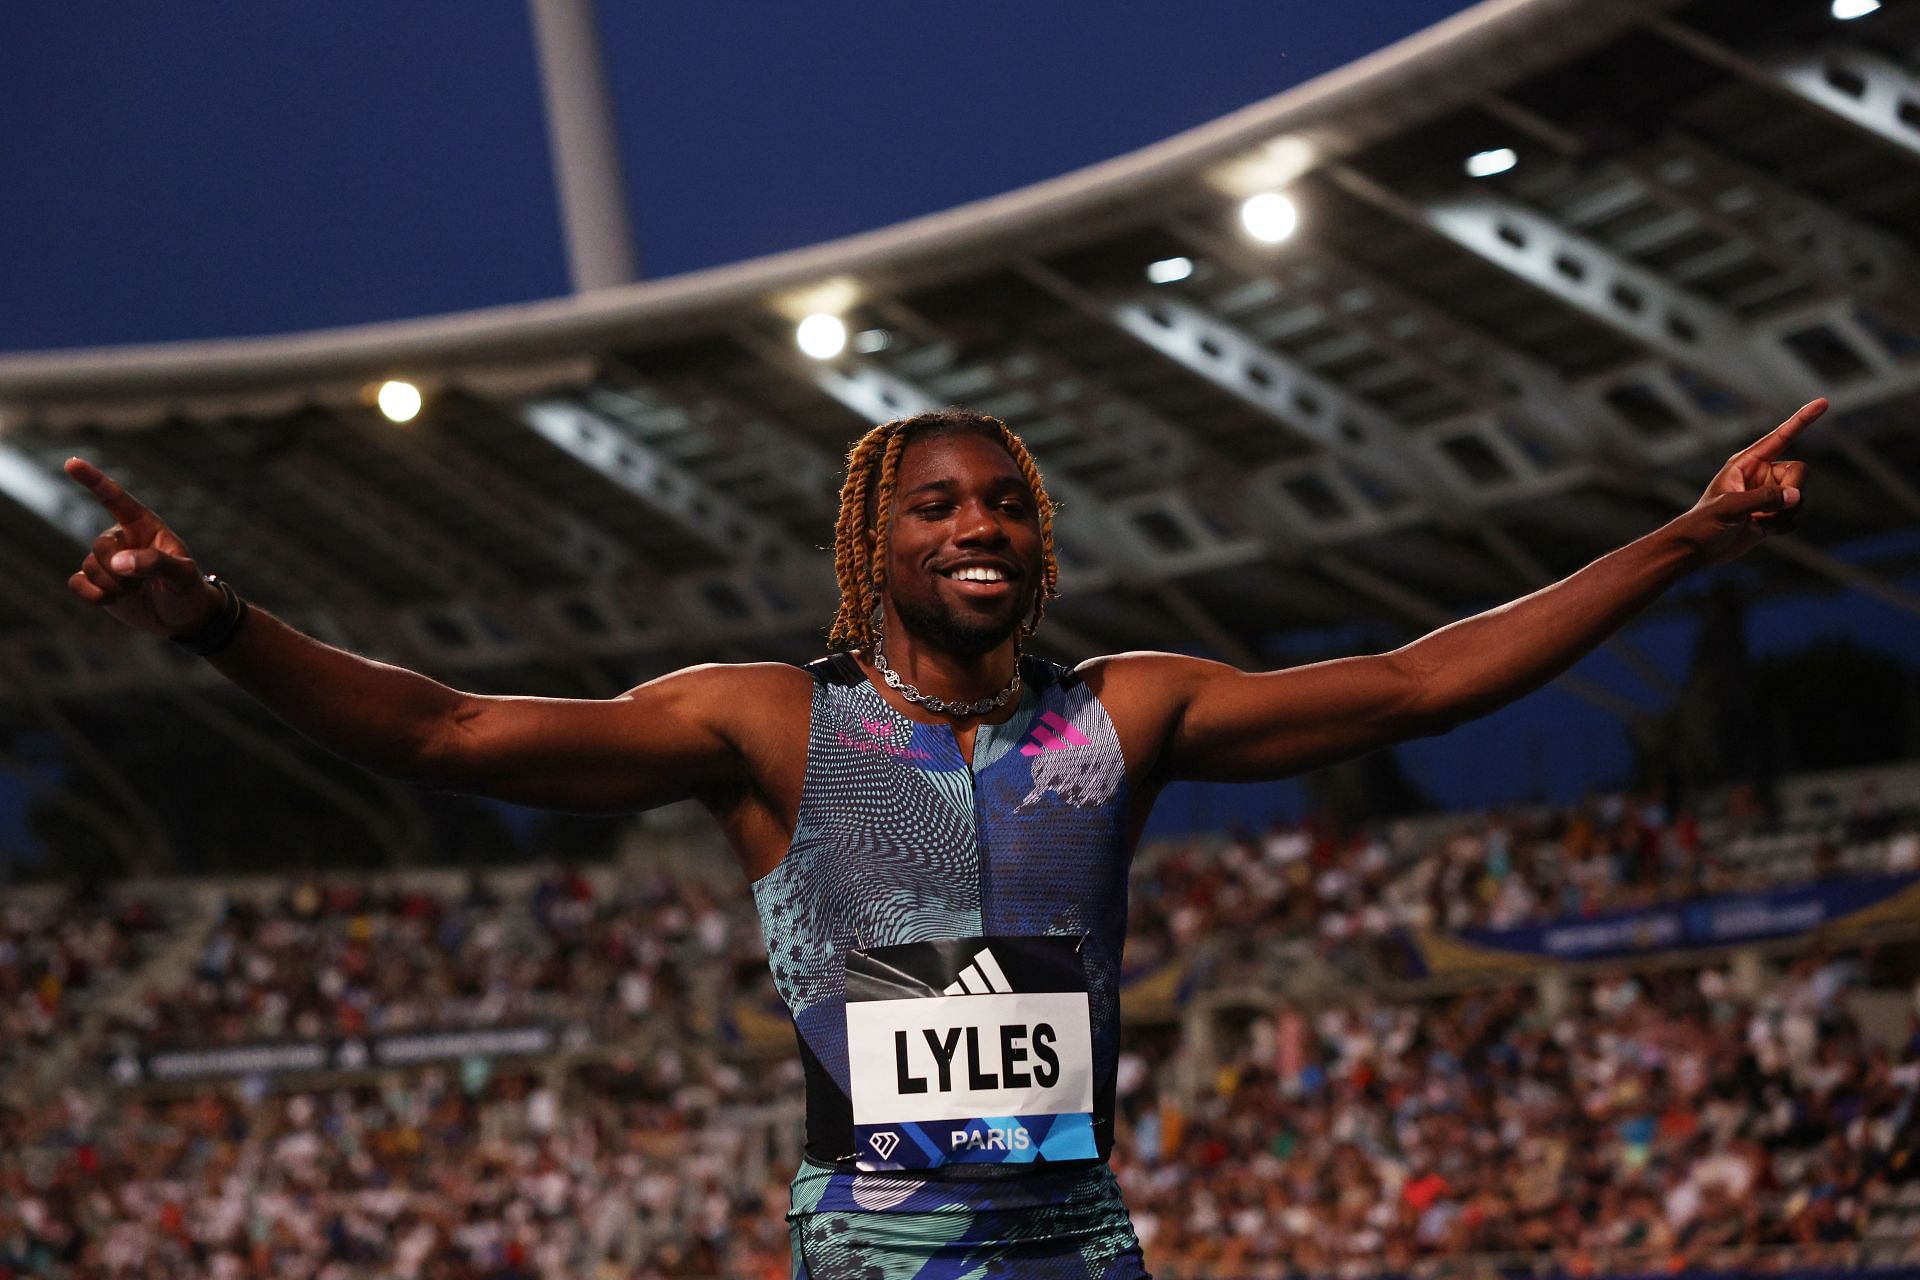 Noah Lyles of Team United States celebrates after winning the Men&#039;s 100 Metres final during Meeting de Paris, part of the 2023 Diamond League series at Stade Charlety on June 09, 2023 in Paris, France. (Photo by Dean Mouhtaropoulos/Getty Images)